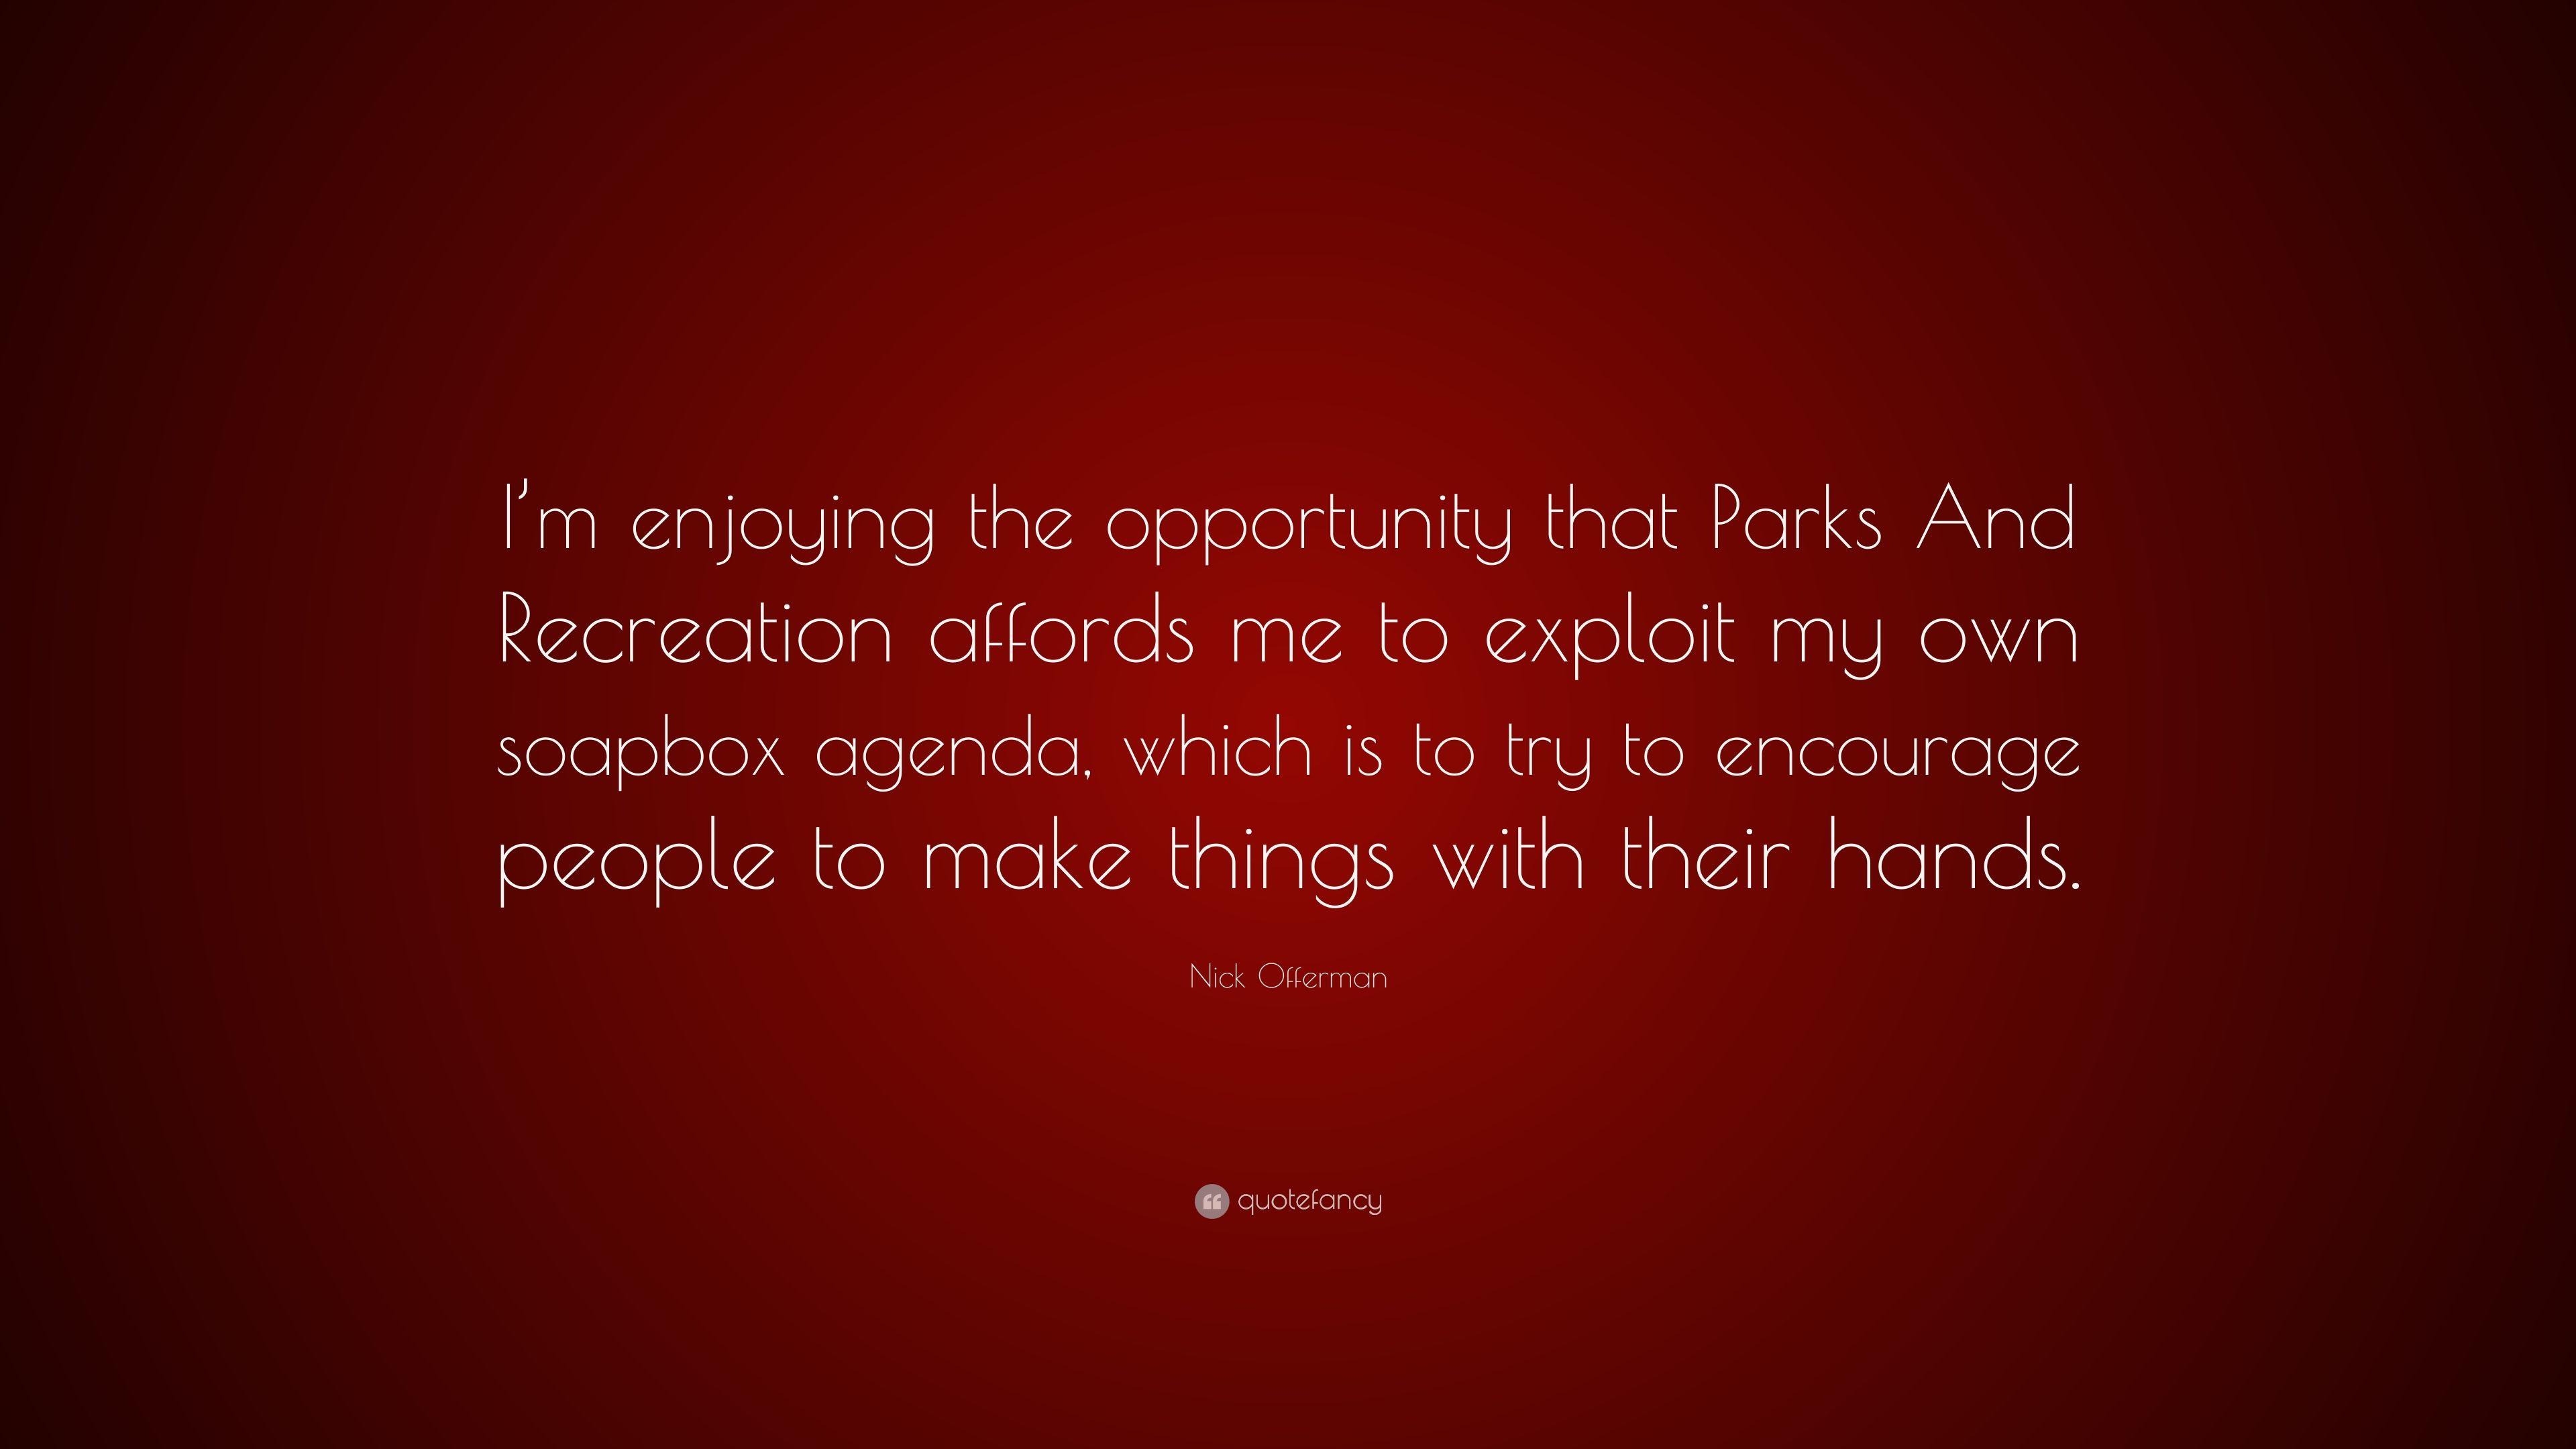 Nick Offerman Quote: “I'm enjoying the opportunity that Parks